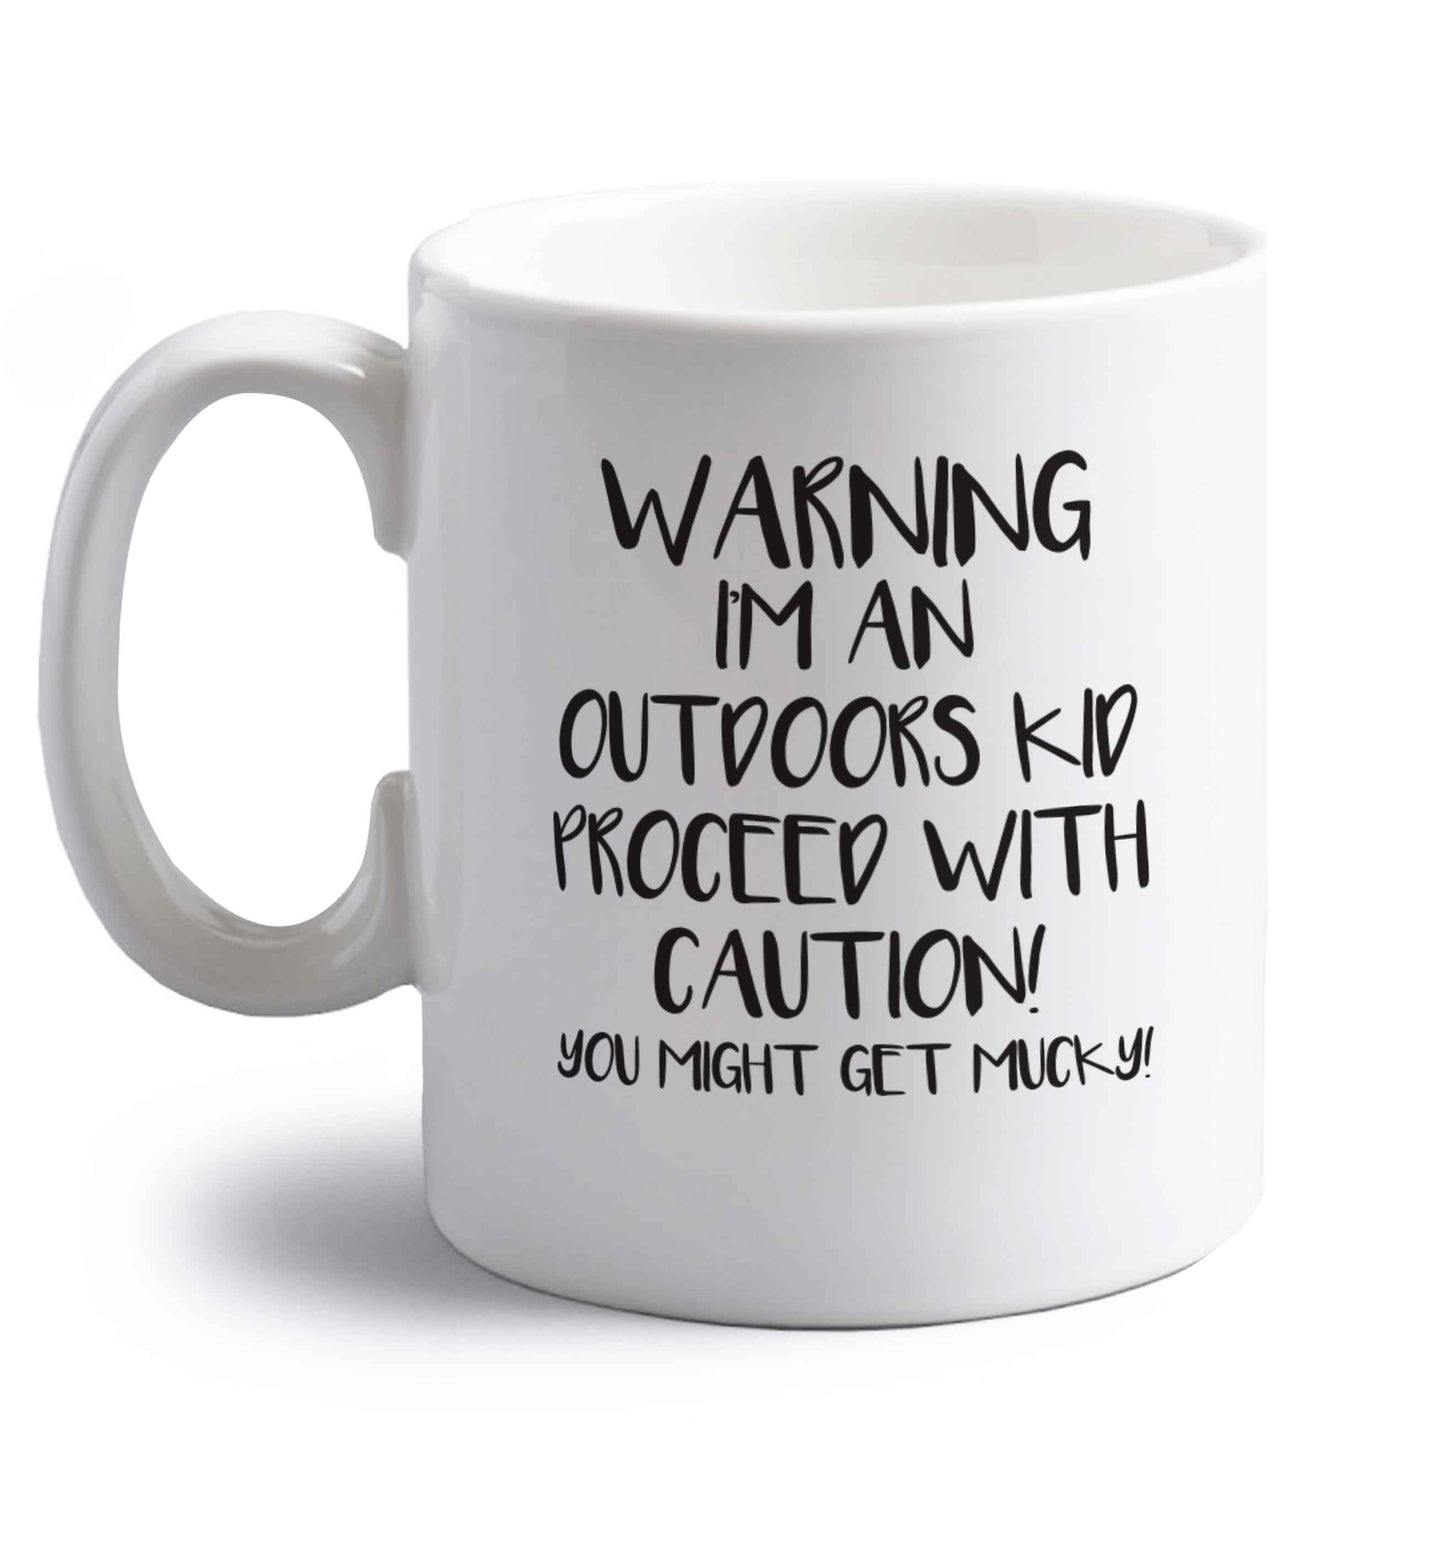 Warning I'm an outdoors kid! Proceed with caution you might get mucky right handed white ceramic mug 